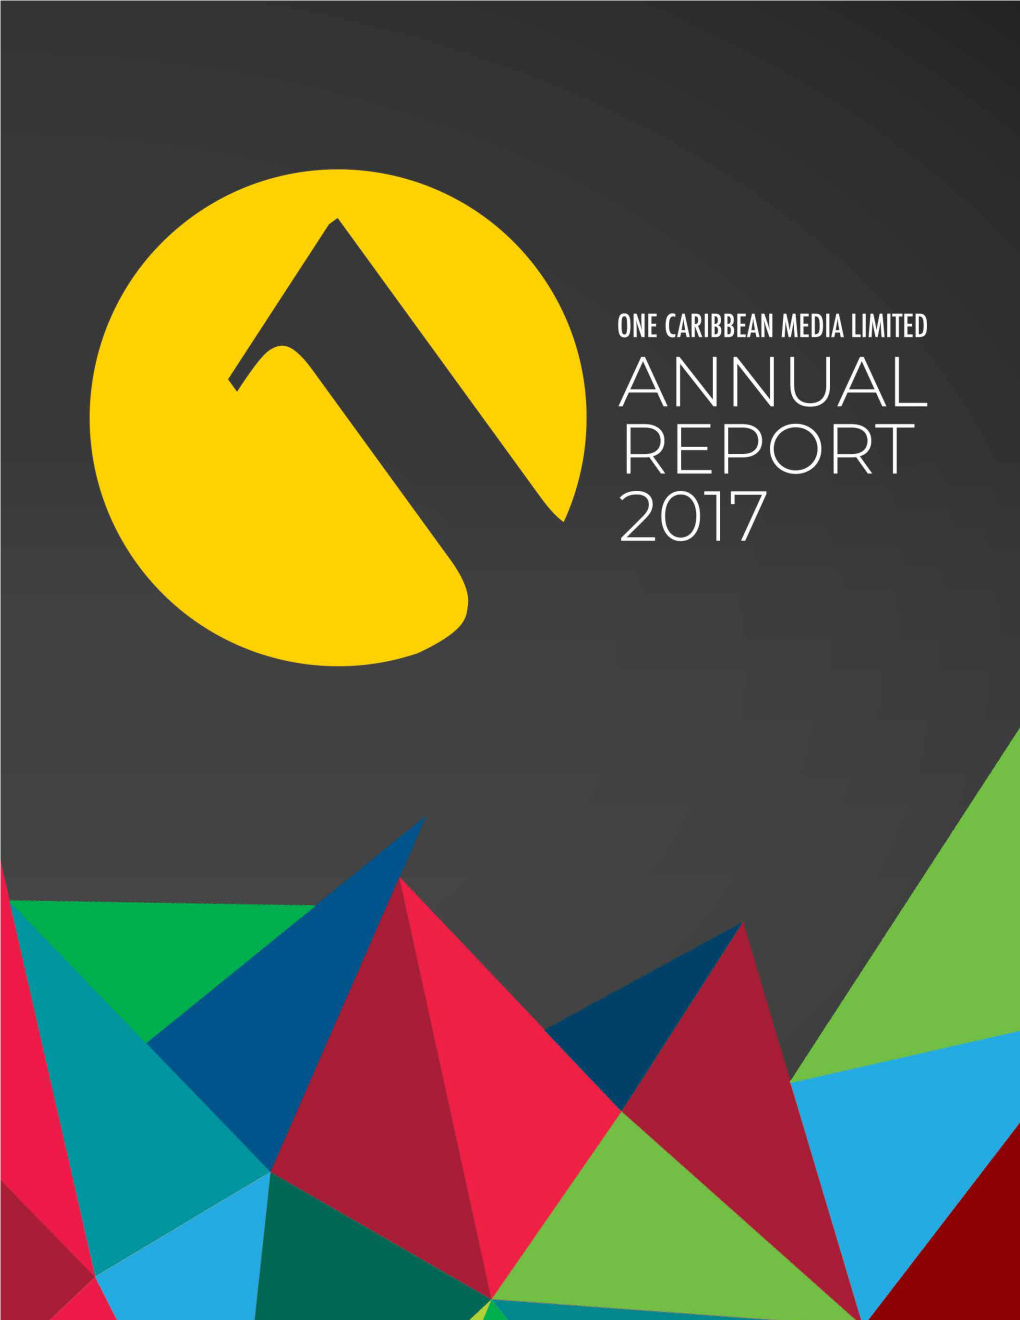 One Caribbean Media Limited Annual Report 2017